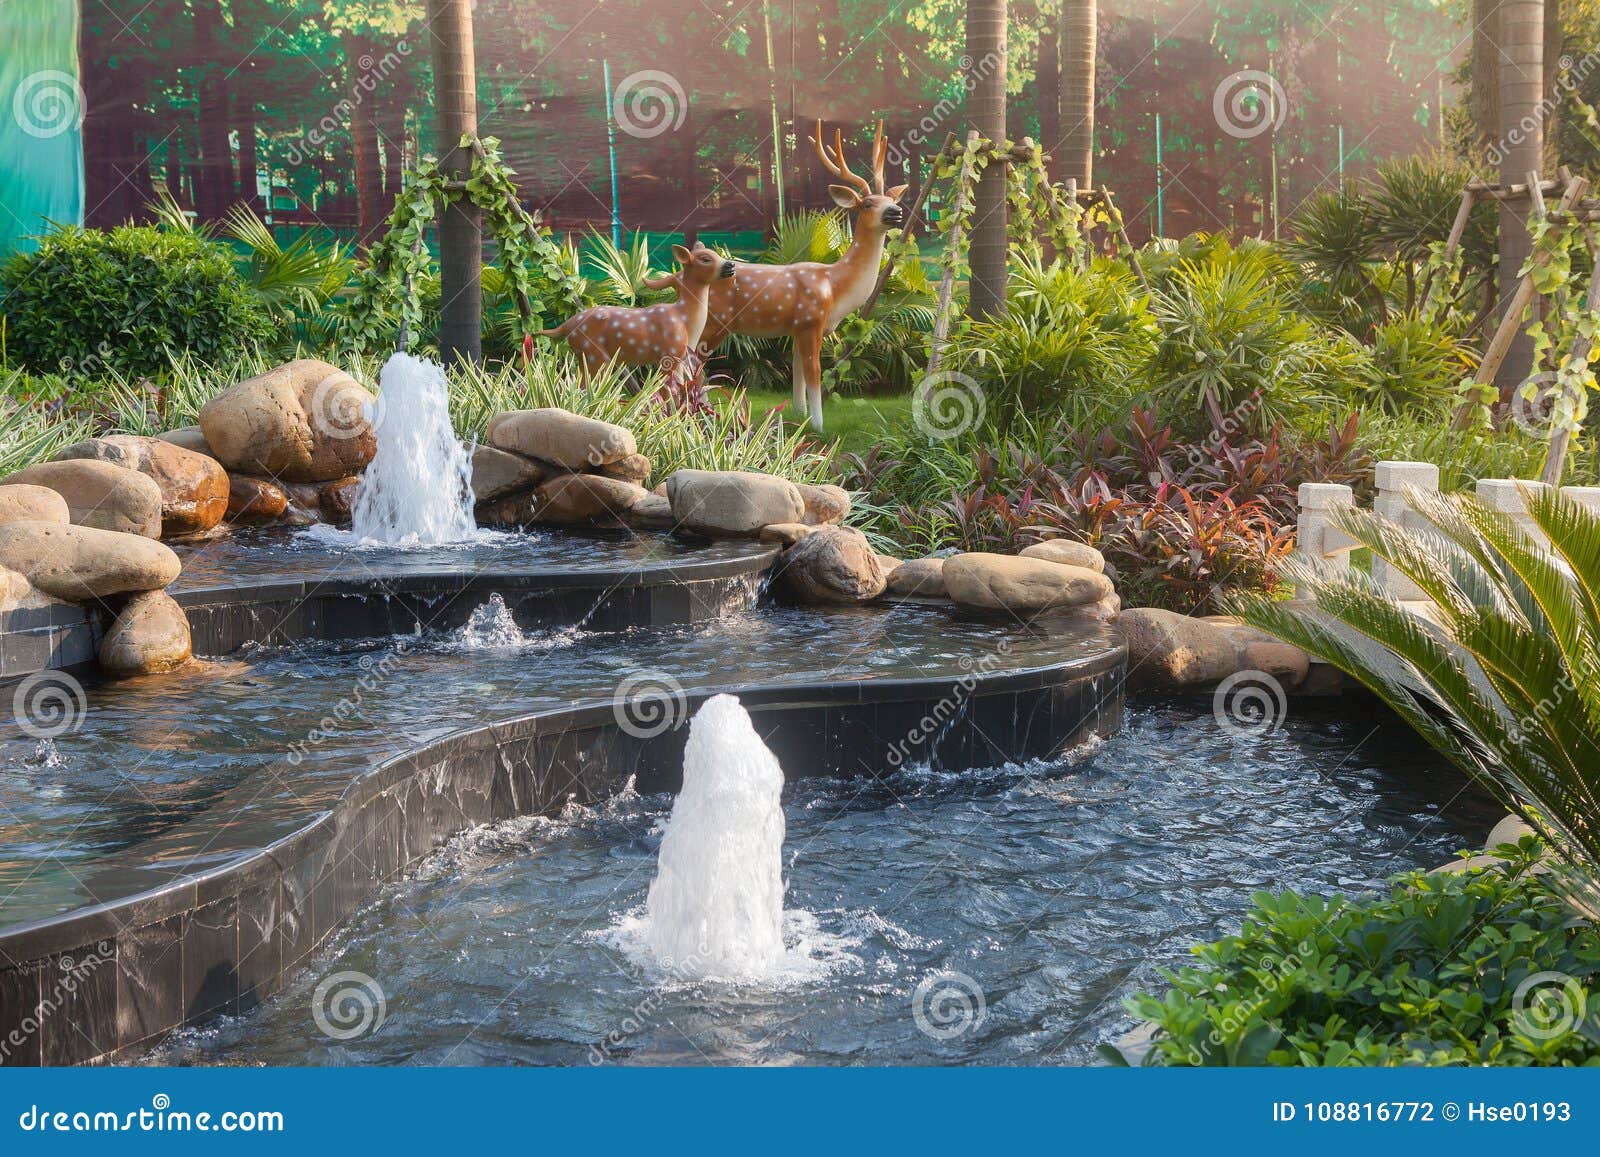 natural style water scene,small garden waterscape 